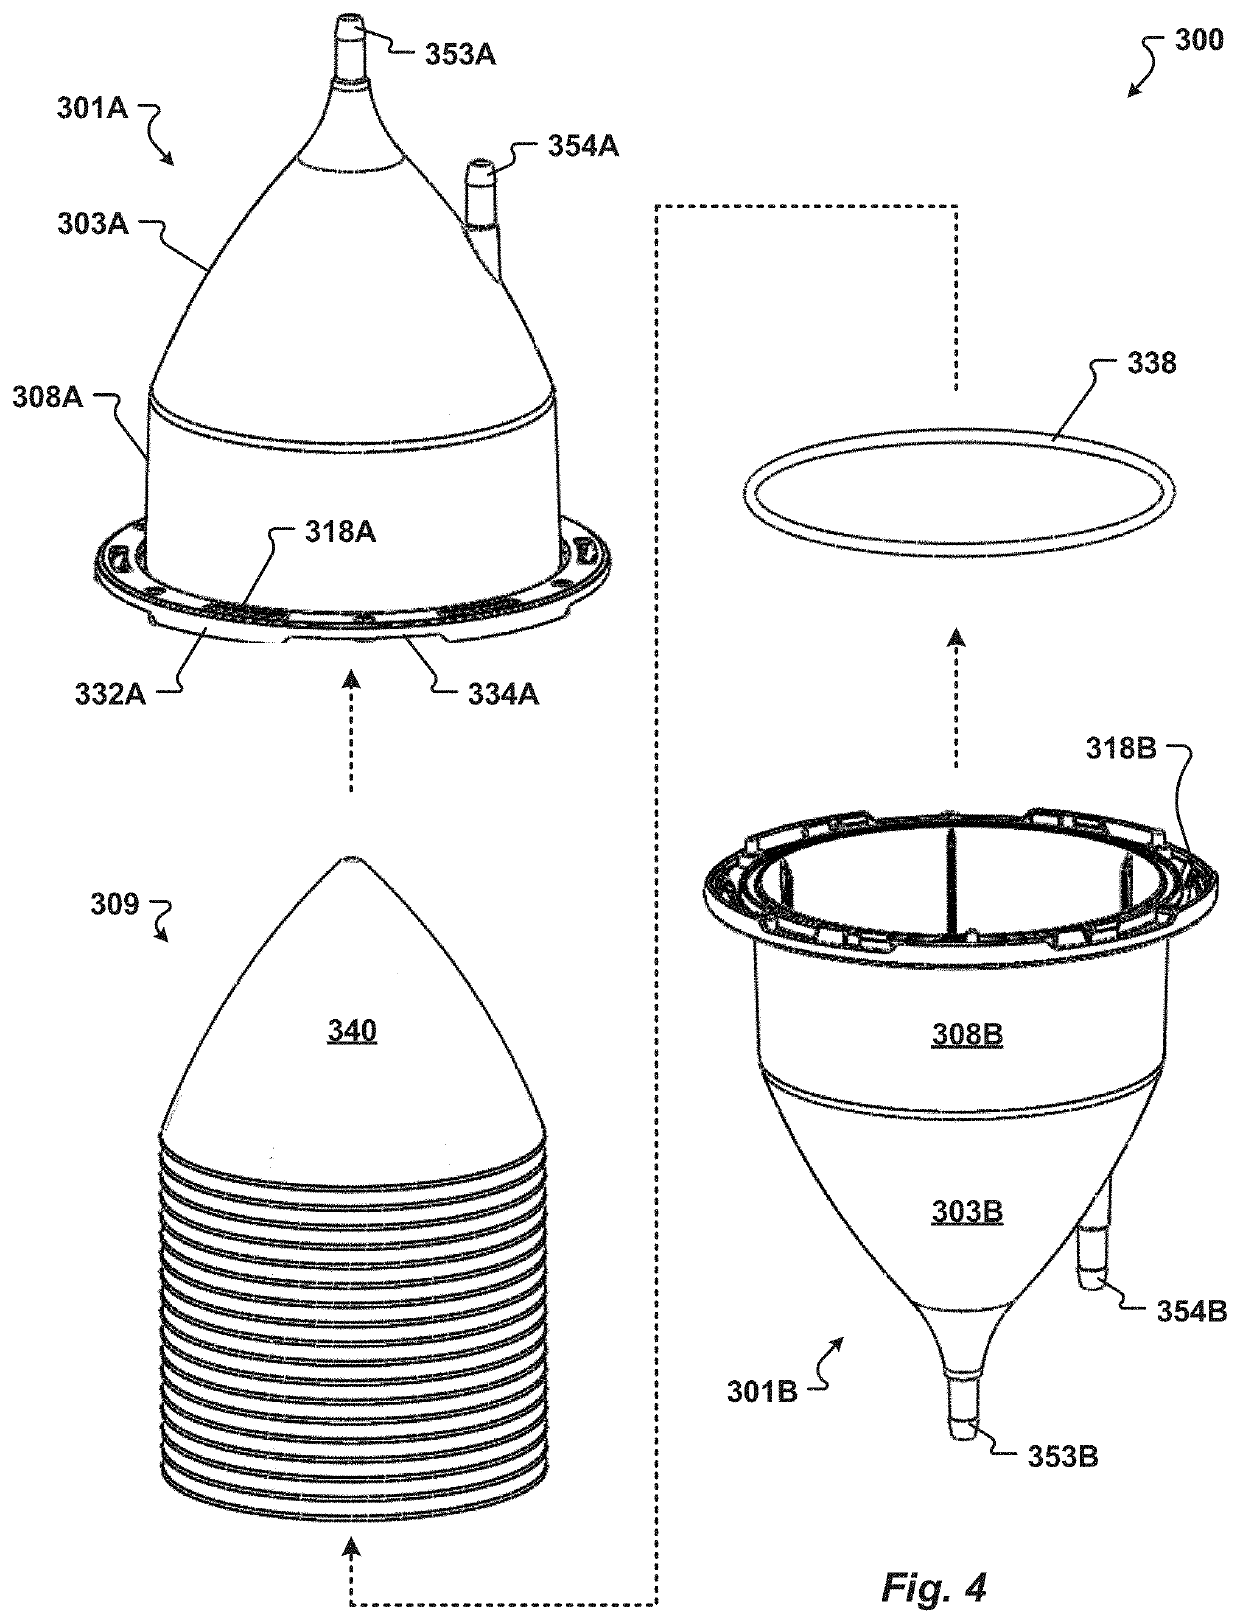 Particle settling devices